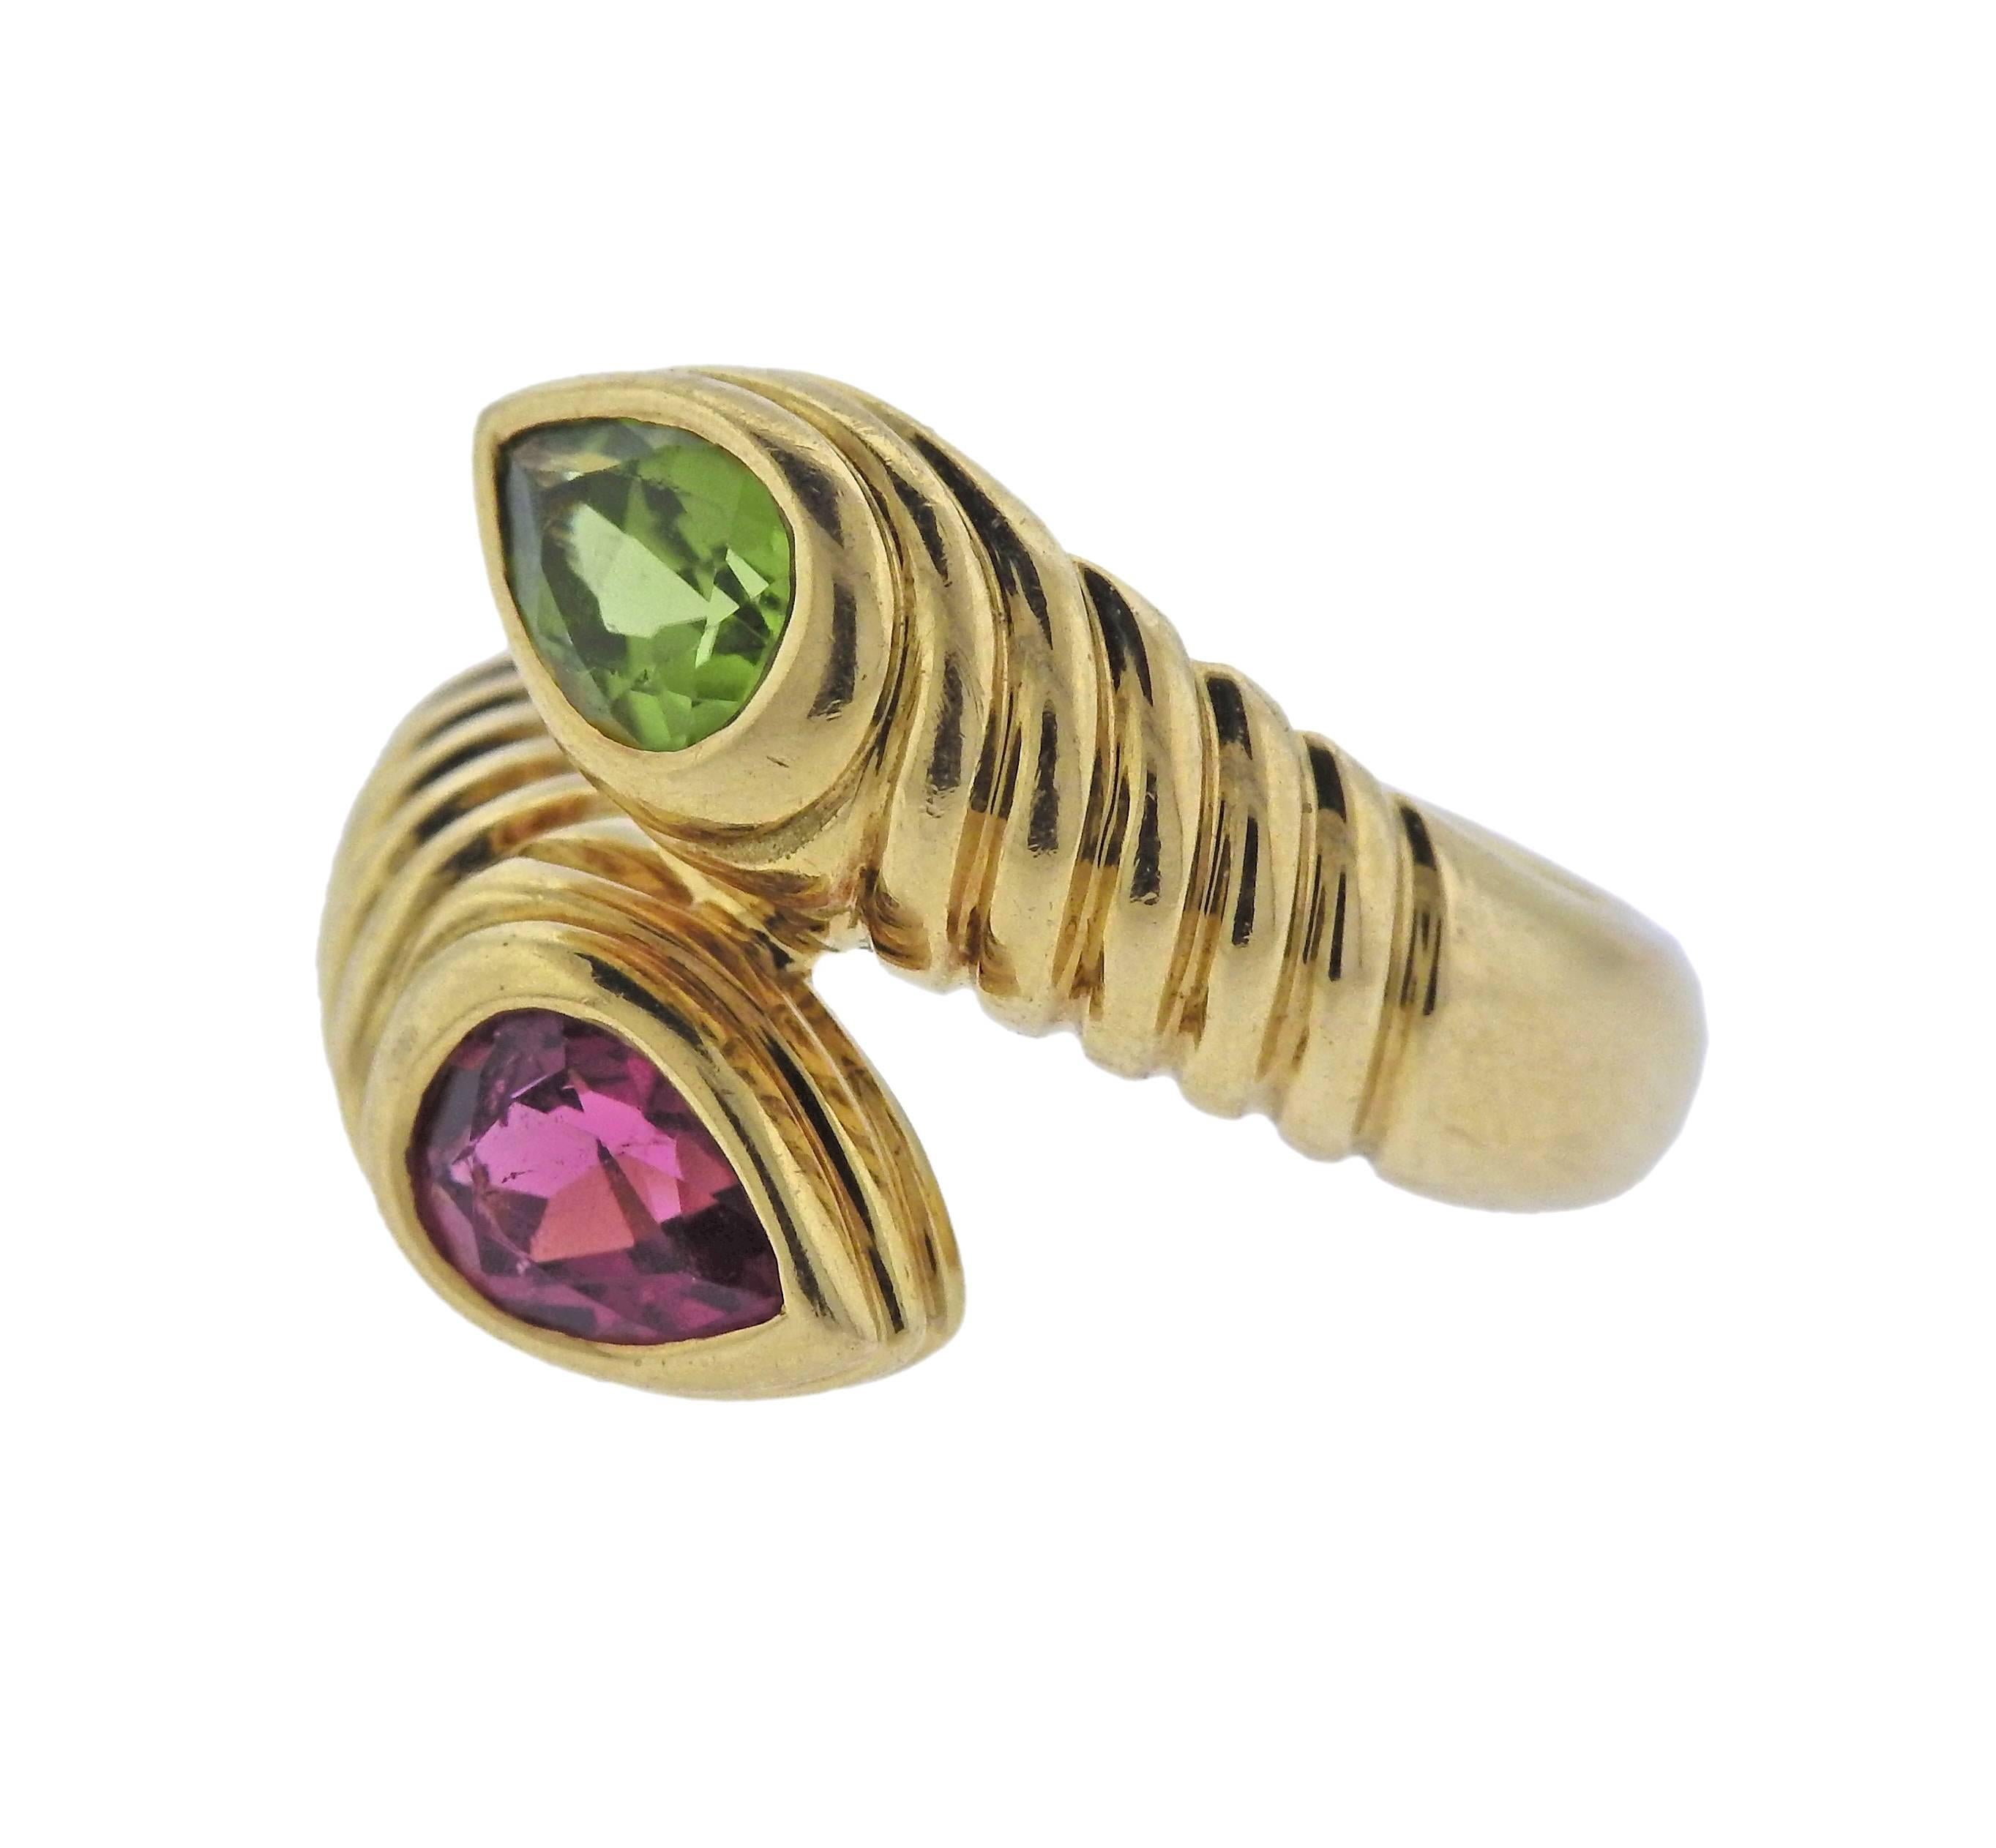 Lovely Bvlgari bypass ring set with pink tourmaline and peridot in 18K gold. Ring is a size 6 and measures 16mm at widest point. Marked with Bvlgari, 750, Made in Italy. Ring weighs 12.6 grams. 